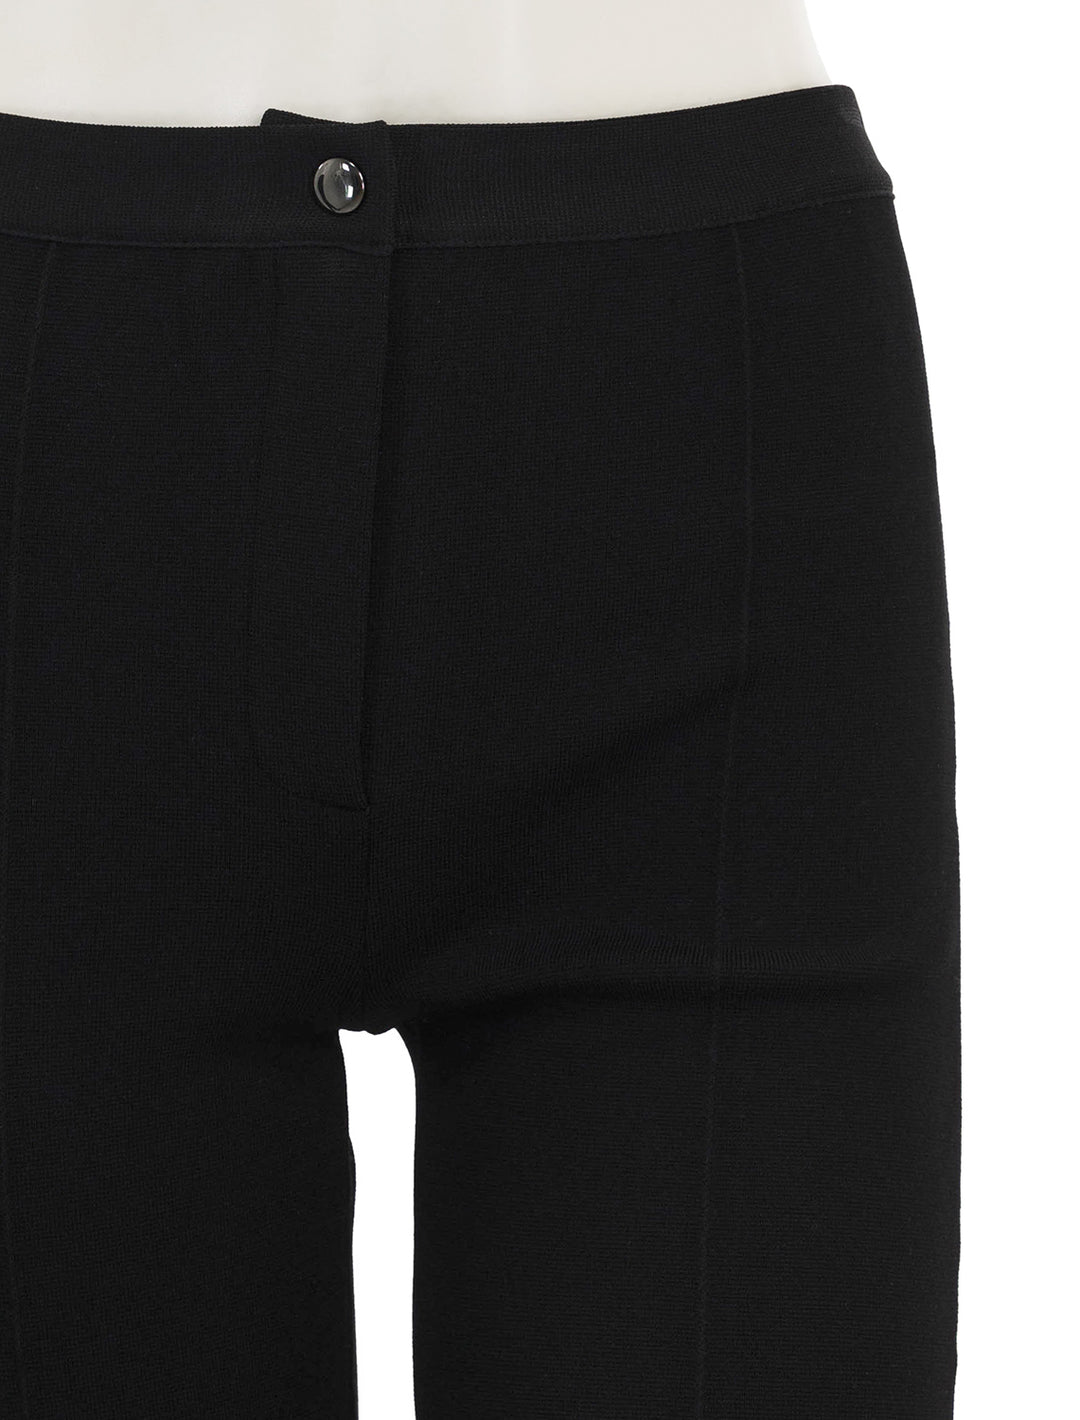 Close-up view of heory's flare pant in black compact crepe.